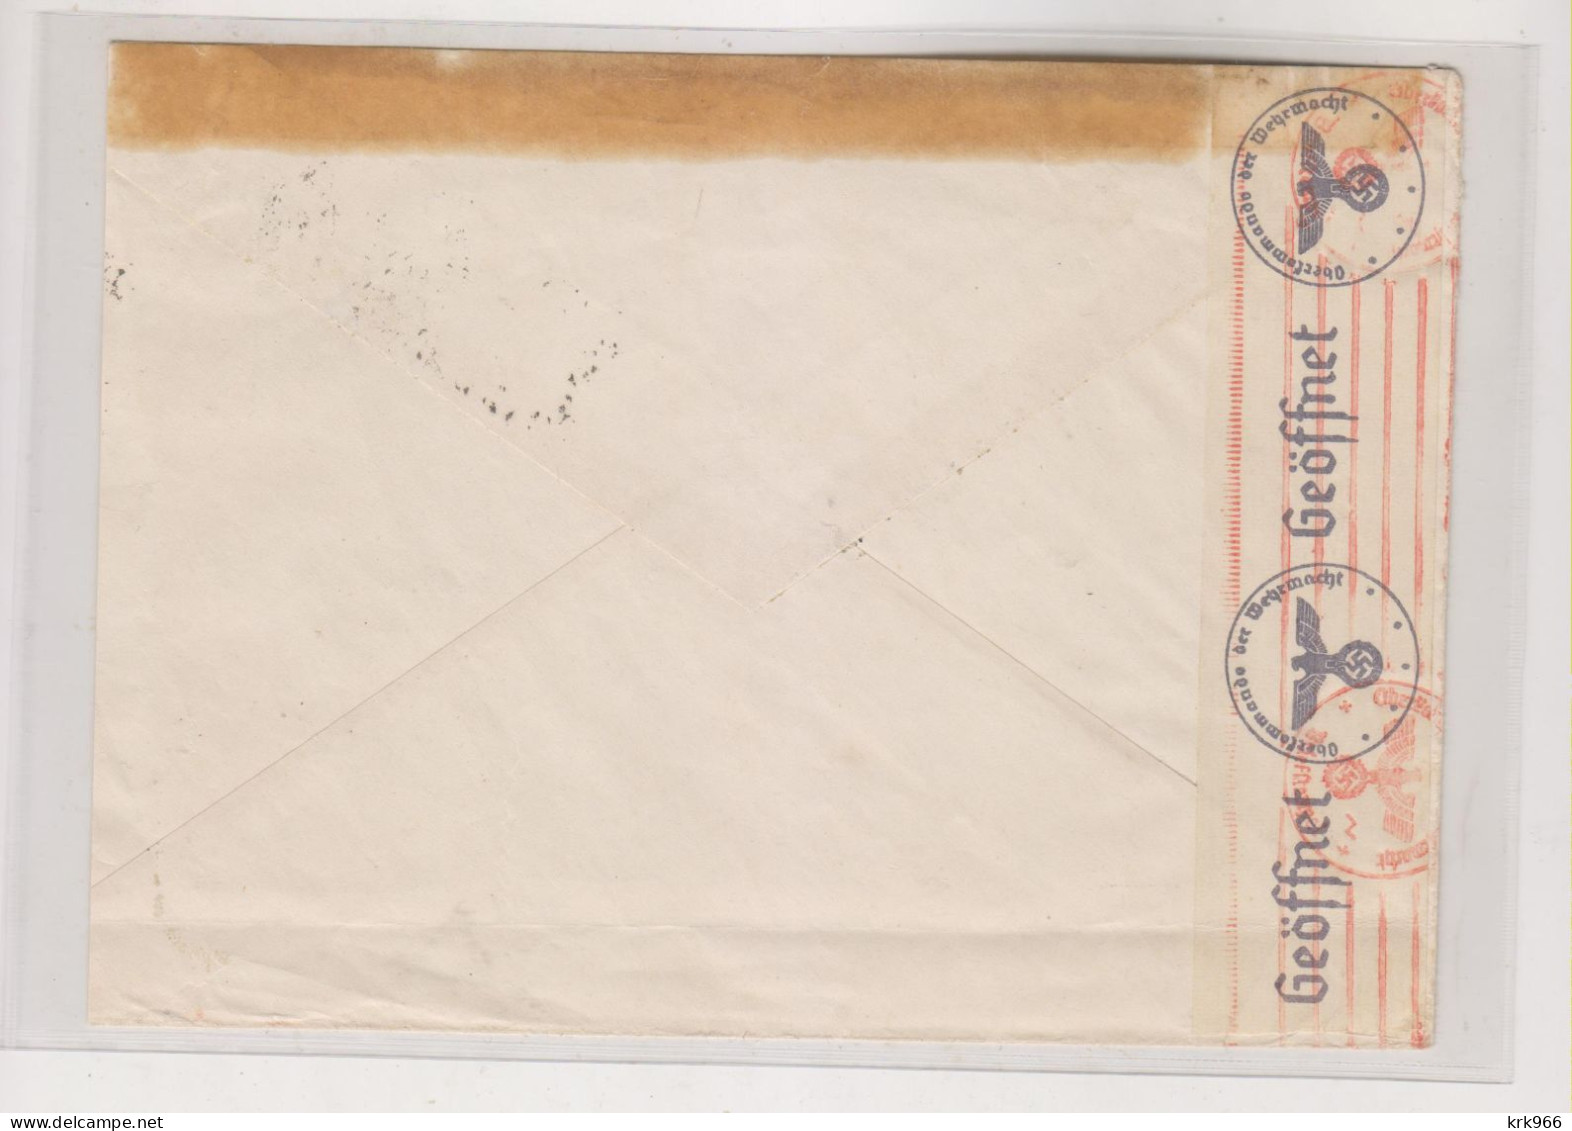 RUSSIA,  1940 LENINGRAD Censored Cover To WIEN Austria Germany - Lettres & Documents